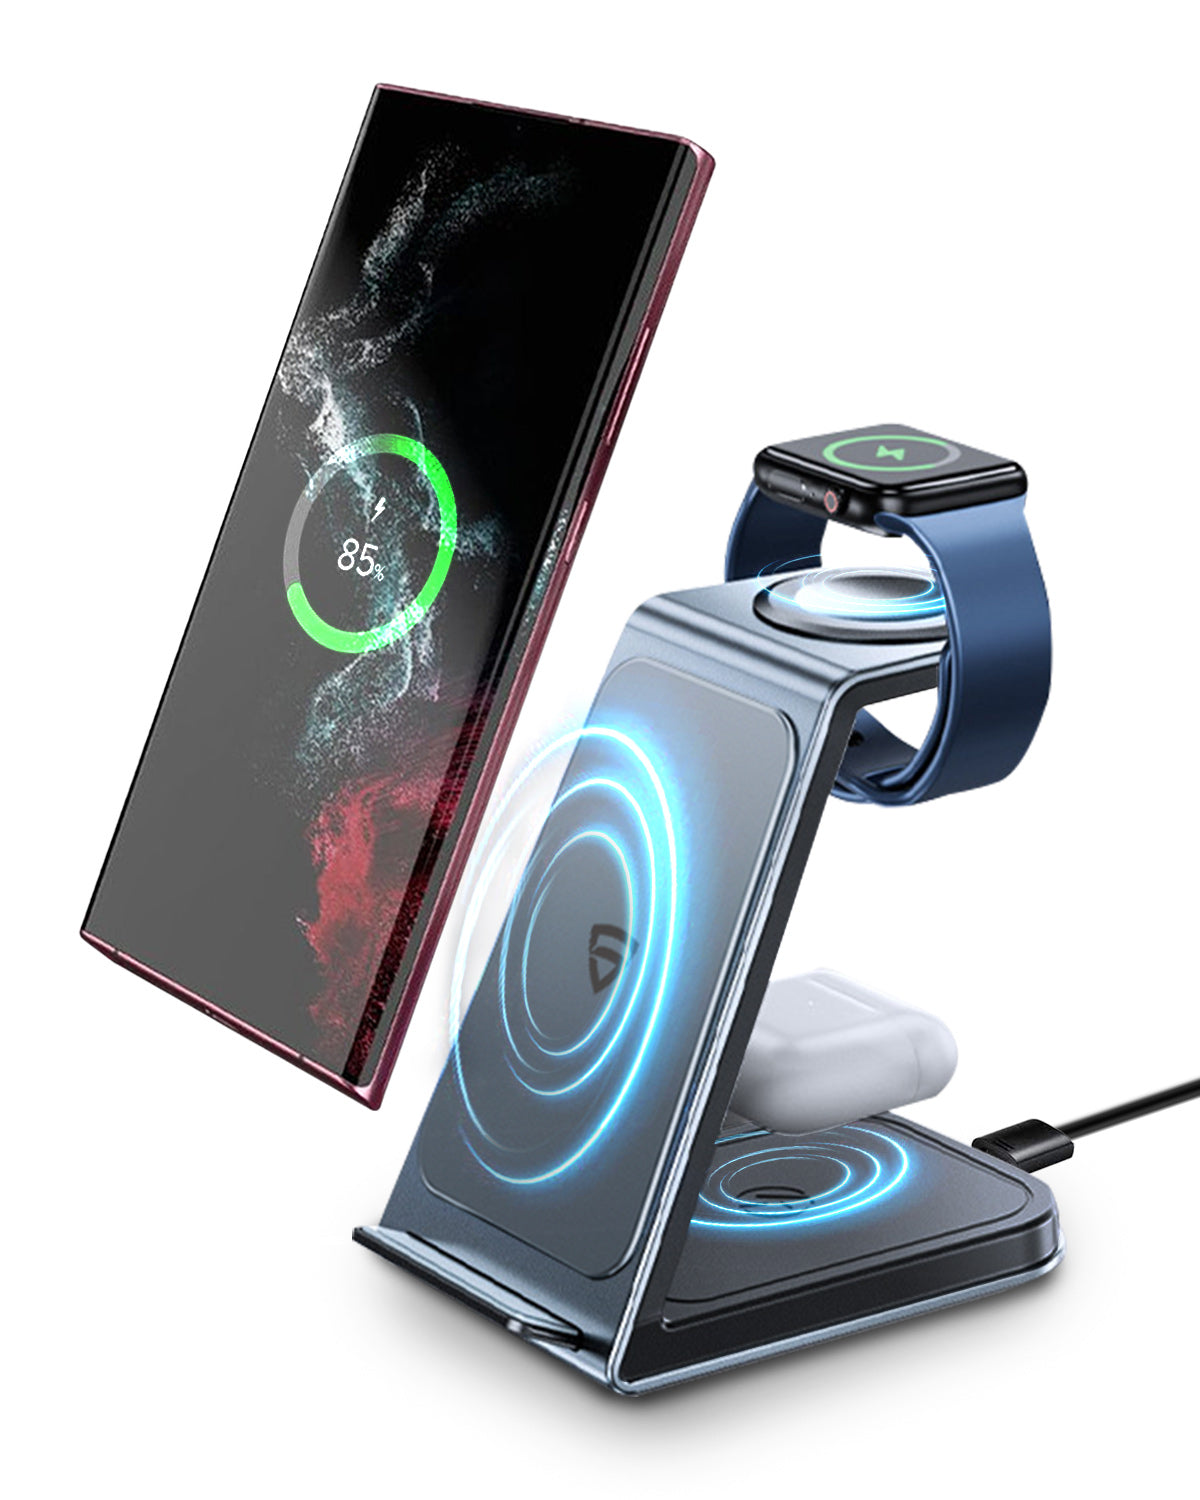 RAEGR Arc 950 | 3 in 1 Wireless Charging Stand